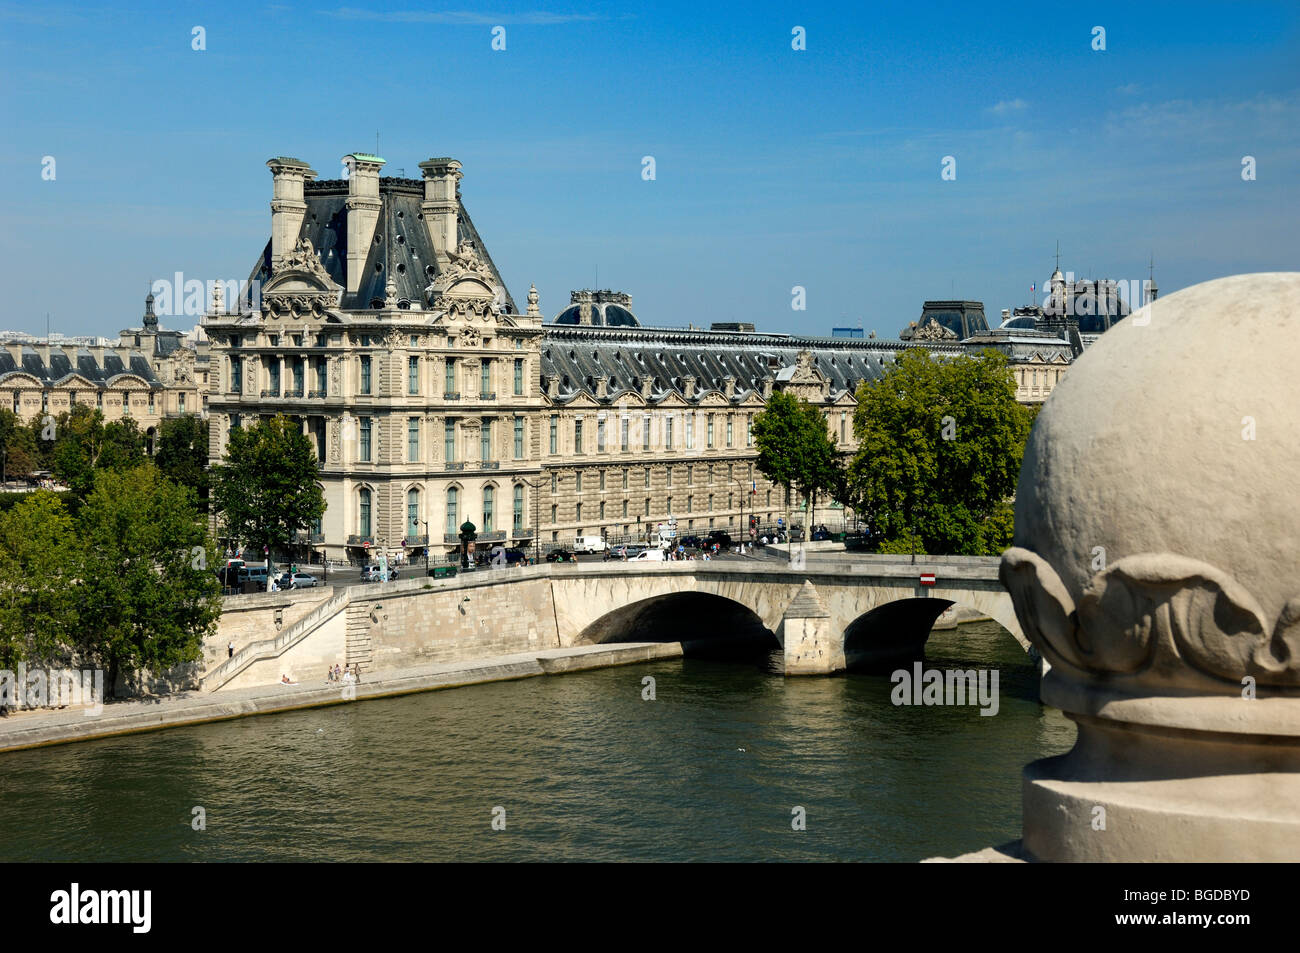 The Louvre Museum or Louvre Palace, River Seine & Pont Royal from the Roof Terrace of the Musée Quai d'Orsay Museum, Paris, France Stock Photo